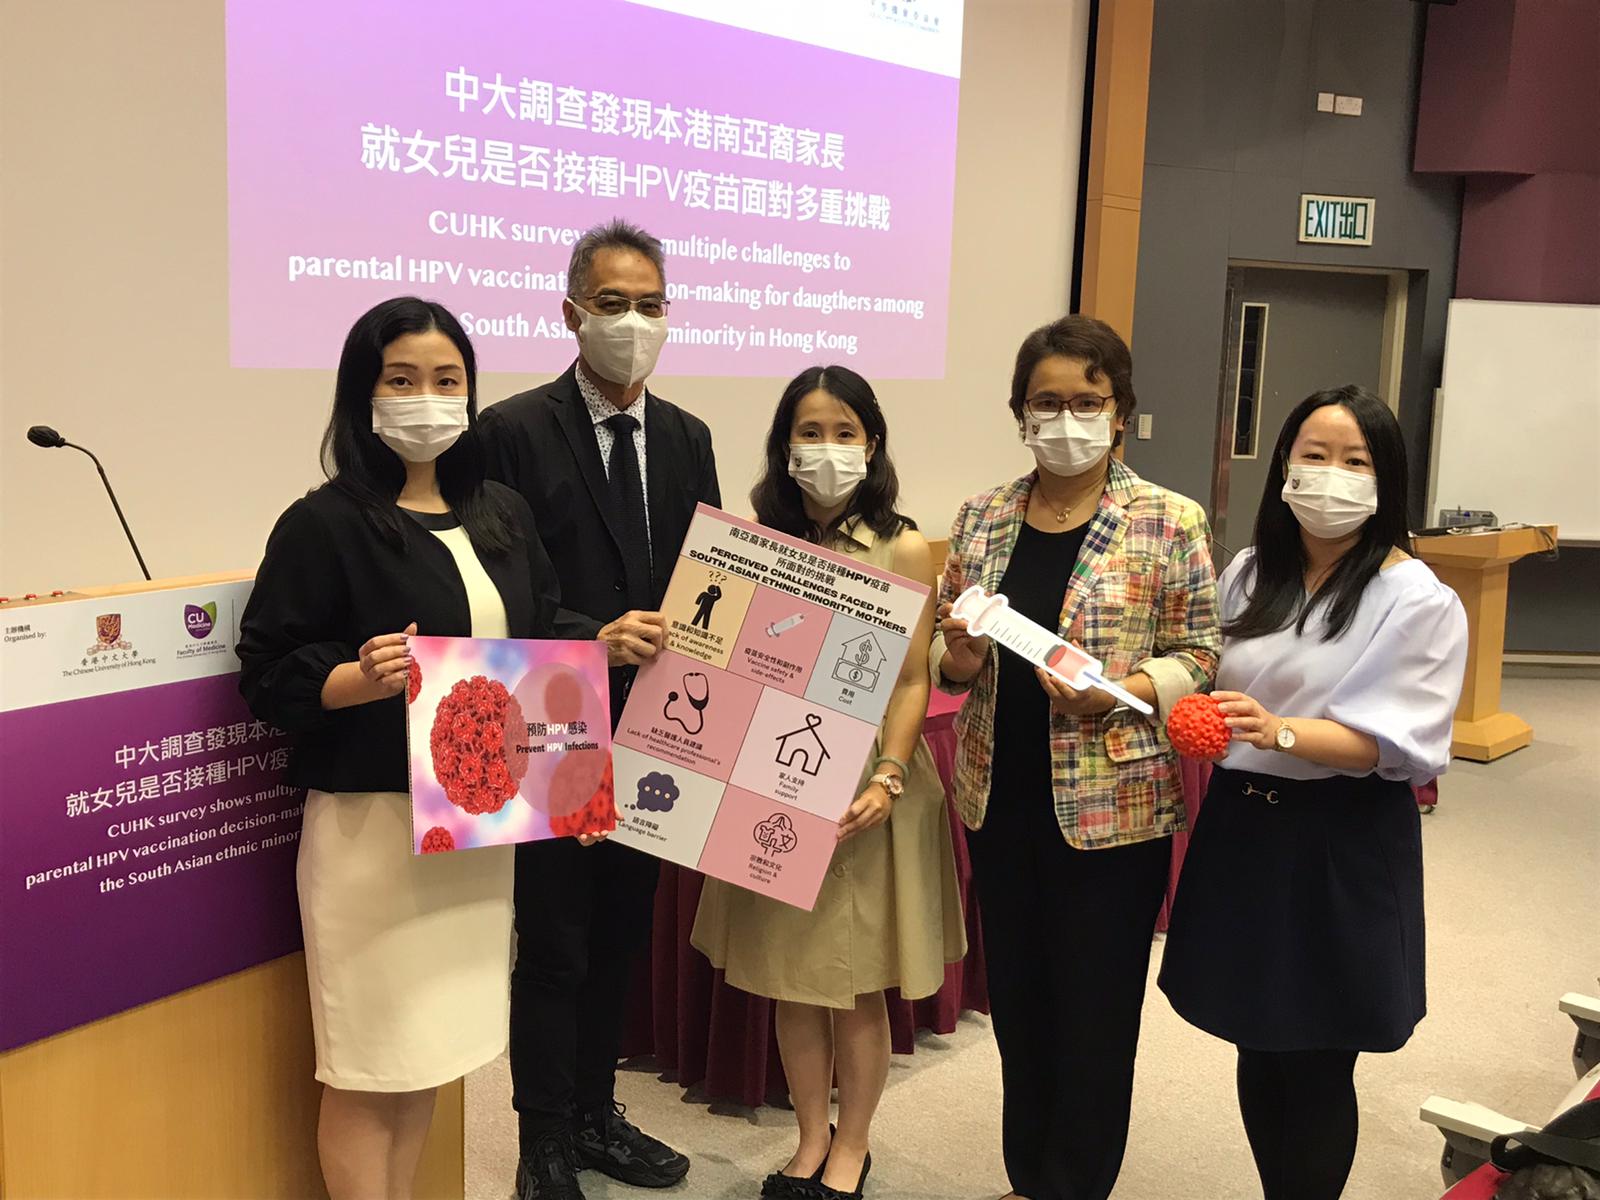 Study stresses need for better access to HPV information for non-ethnic Chinese